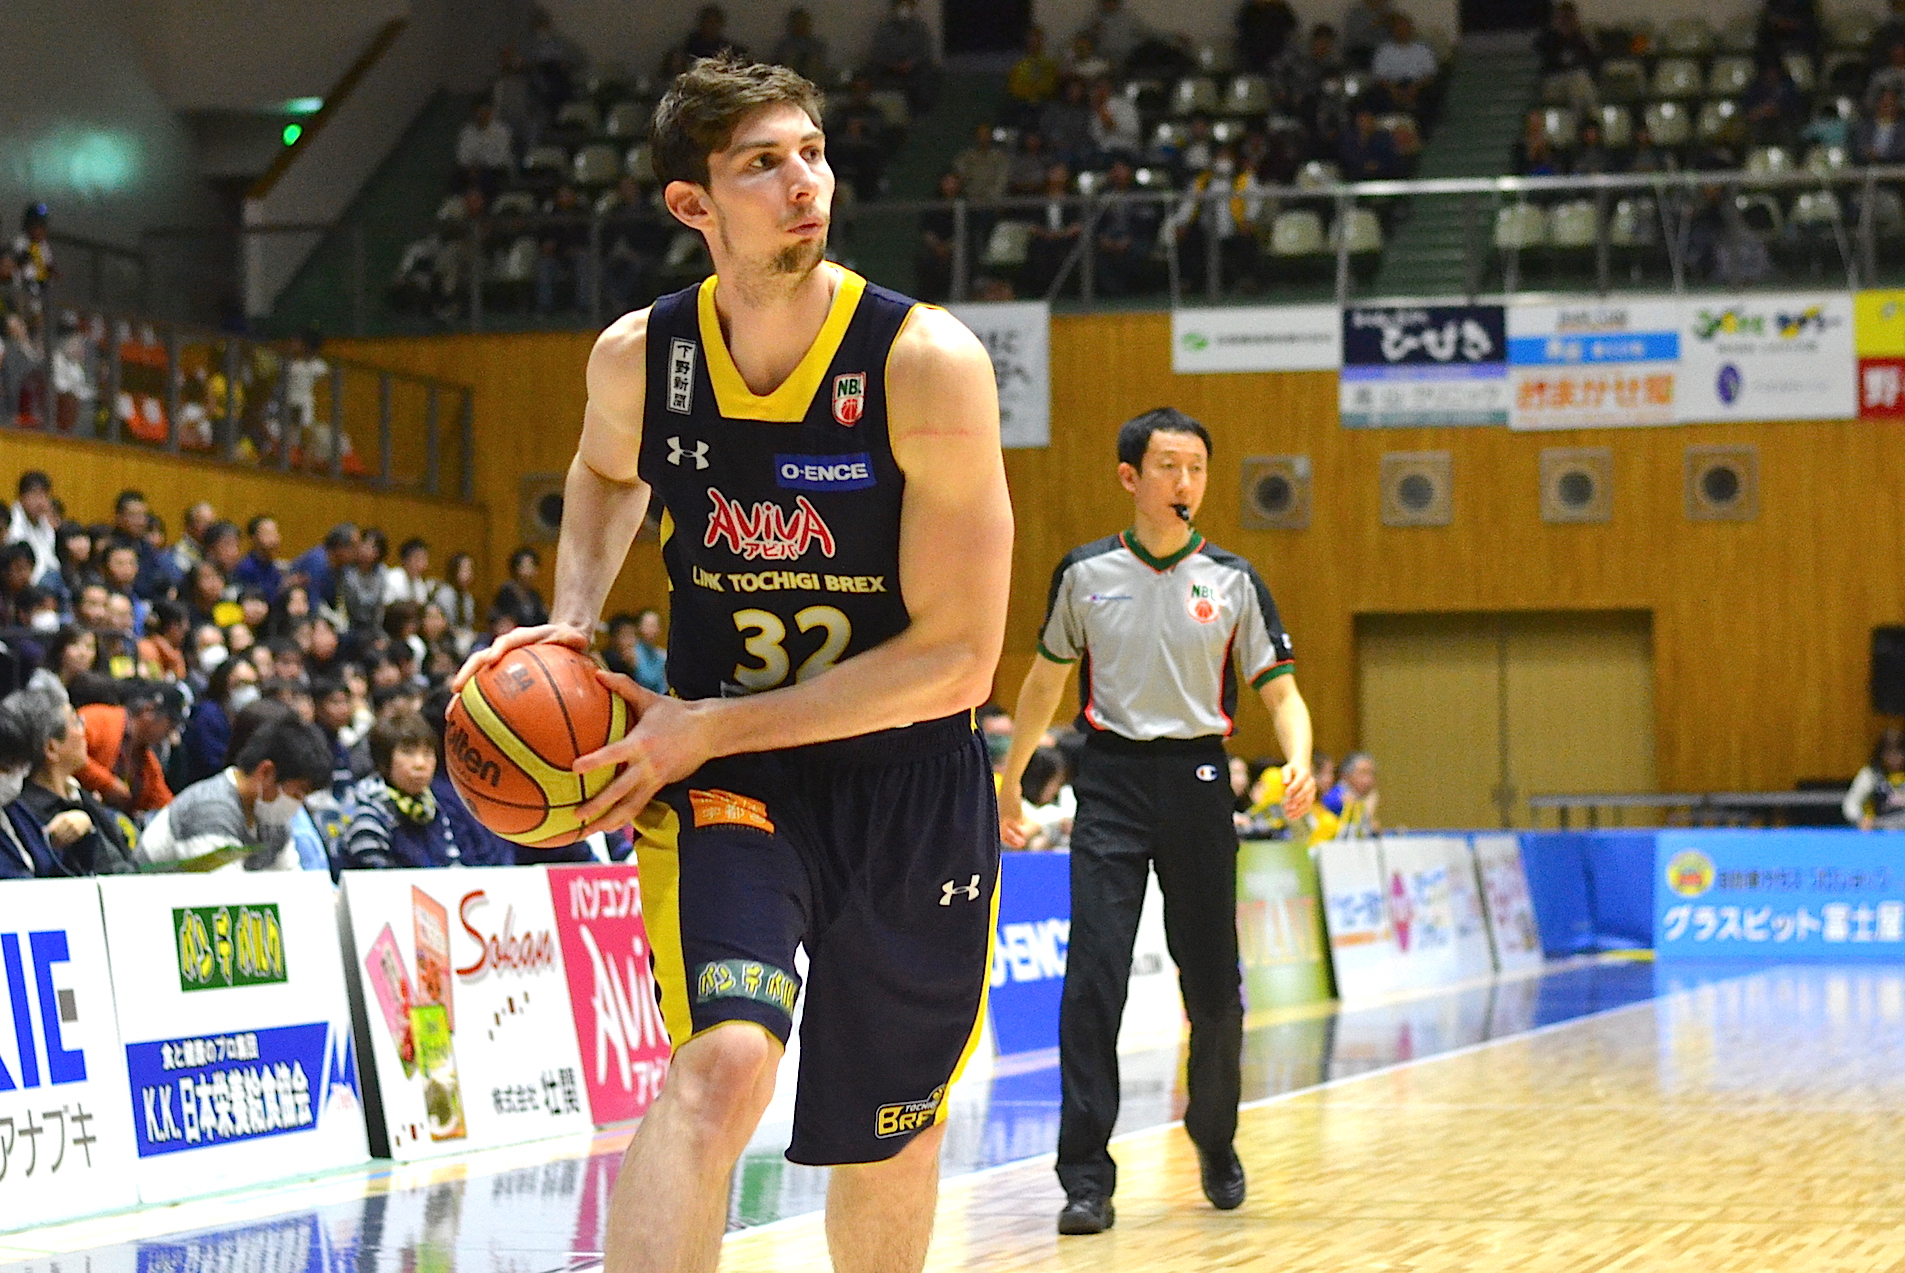 Player S Voice Nbl リンク栃木ブレックスvs和歌山トライアンズ15 03 28 Boost The Game